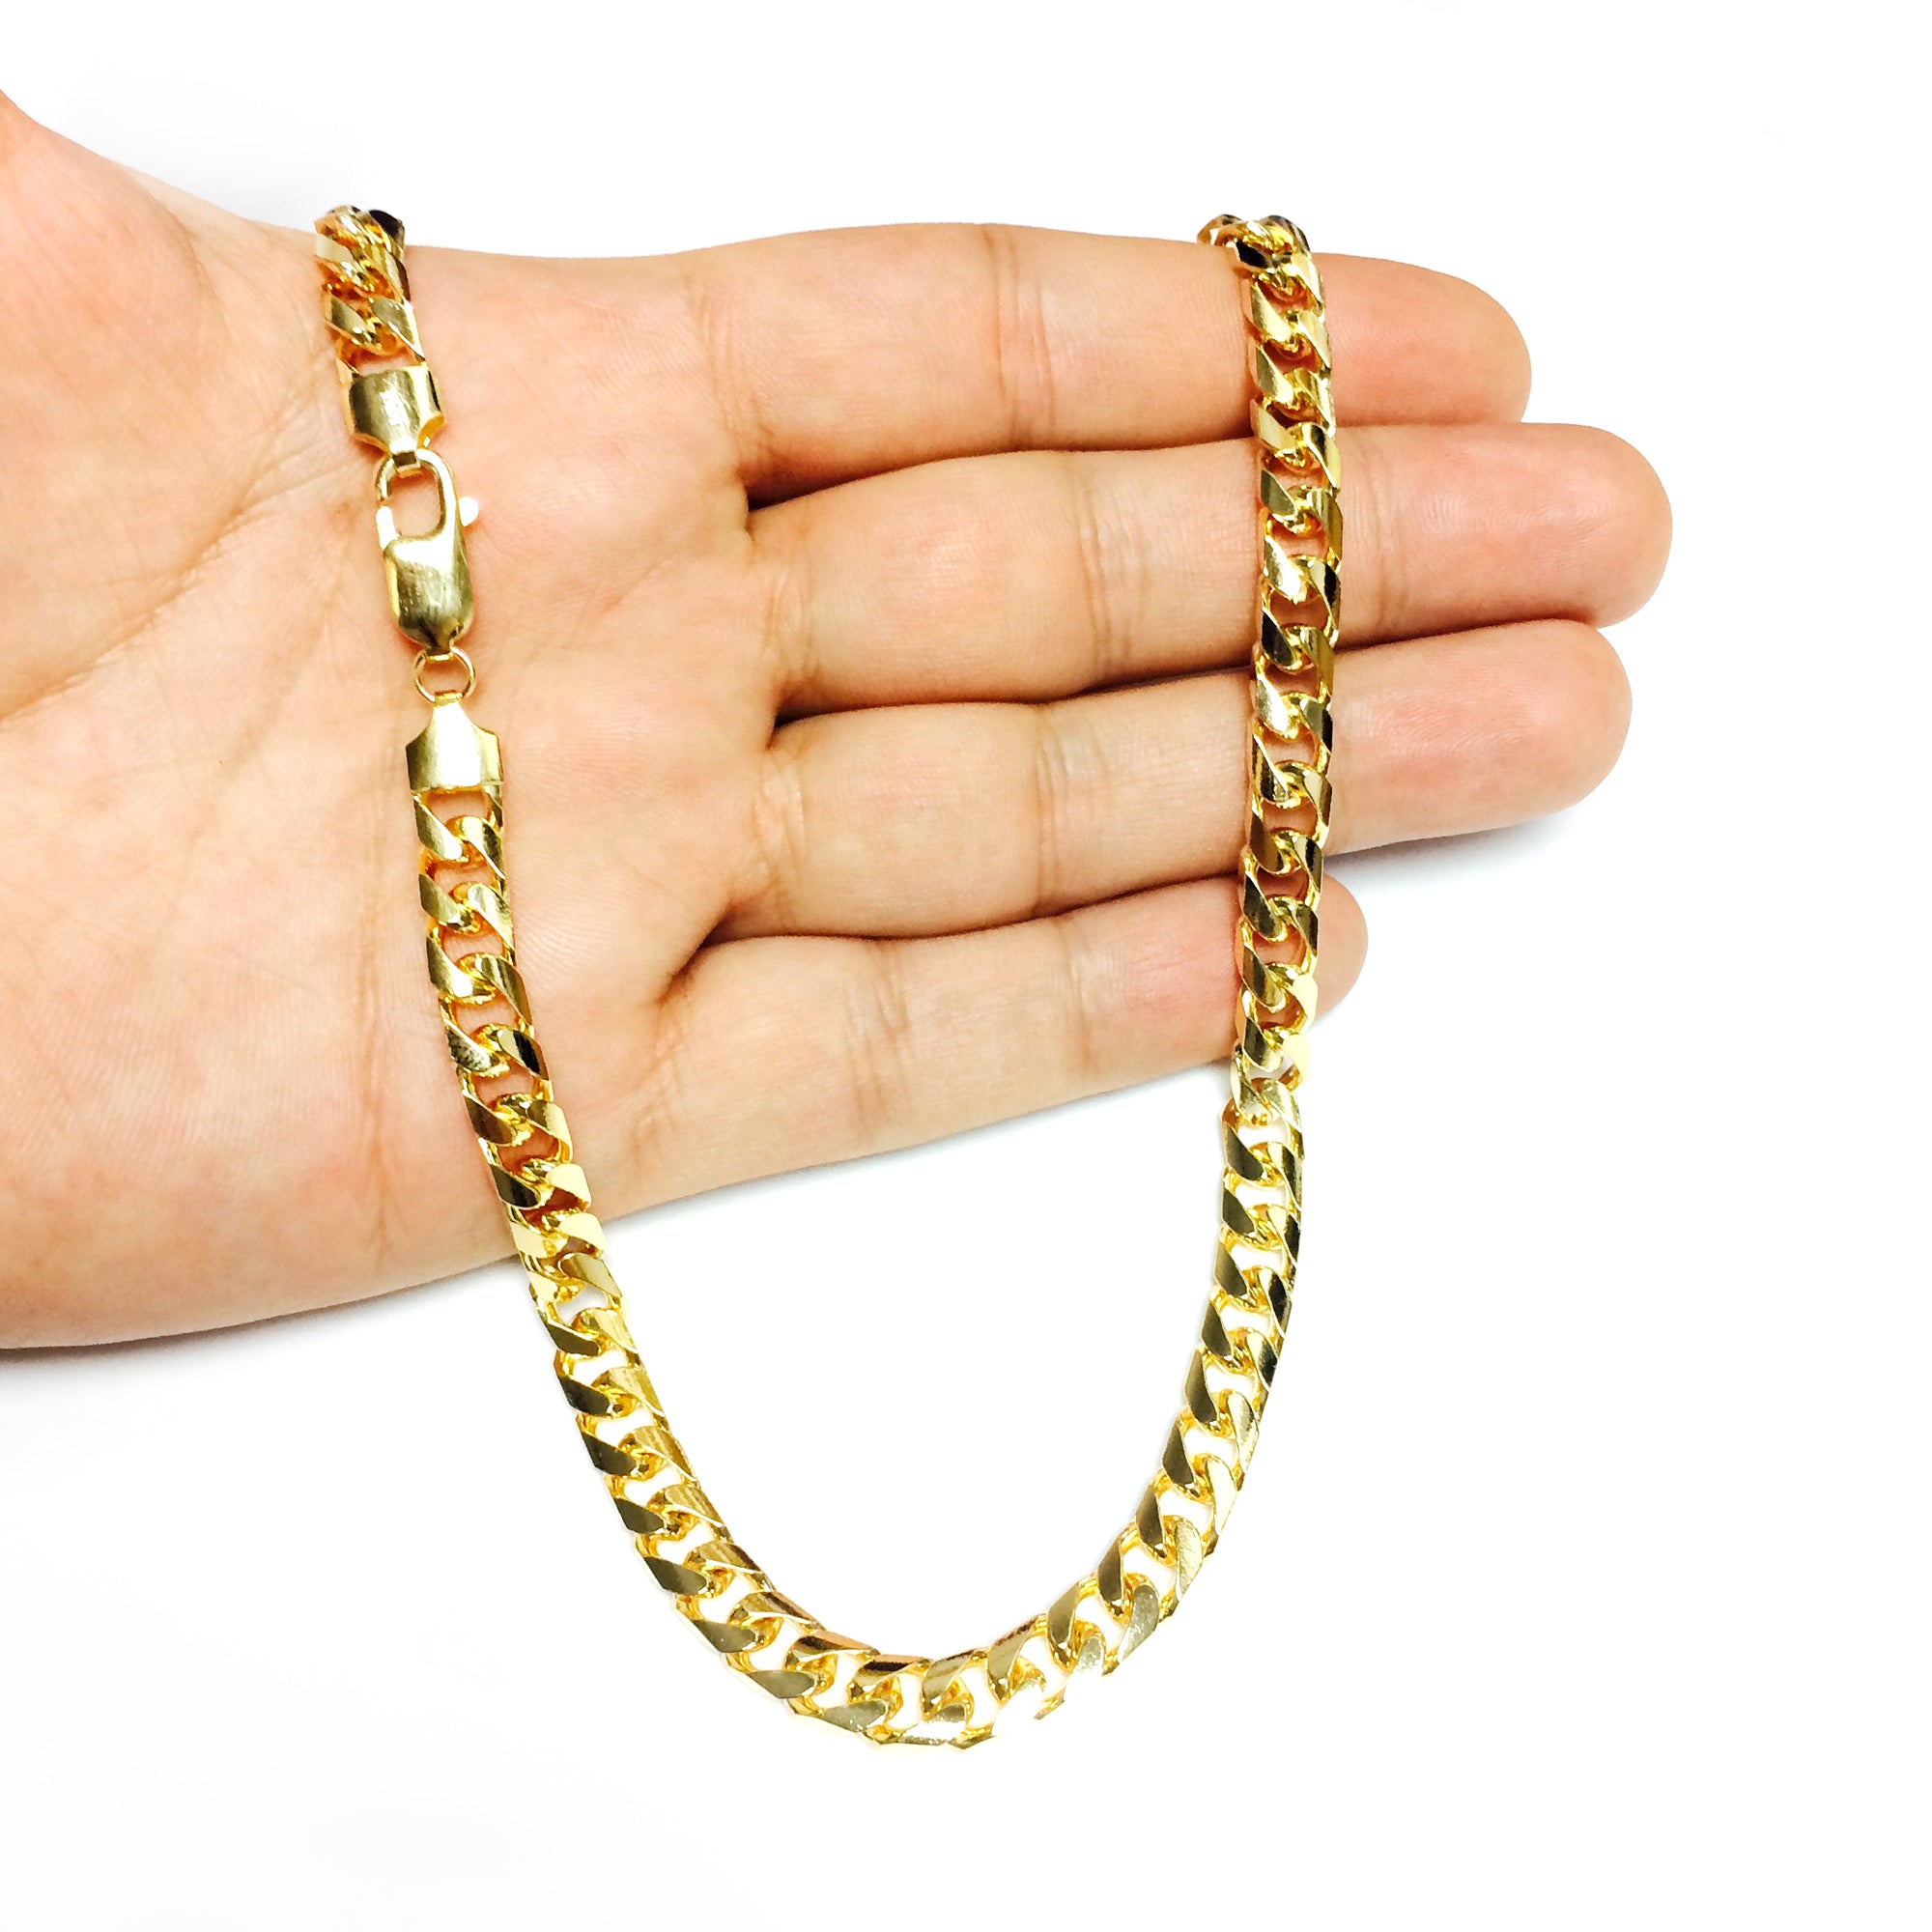 14k Yellow Gold Miami Cuban Link Chain Necklace, Width 6.9mm fine designer jewelry for men and women